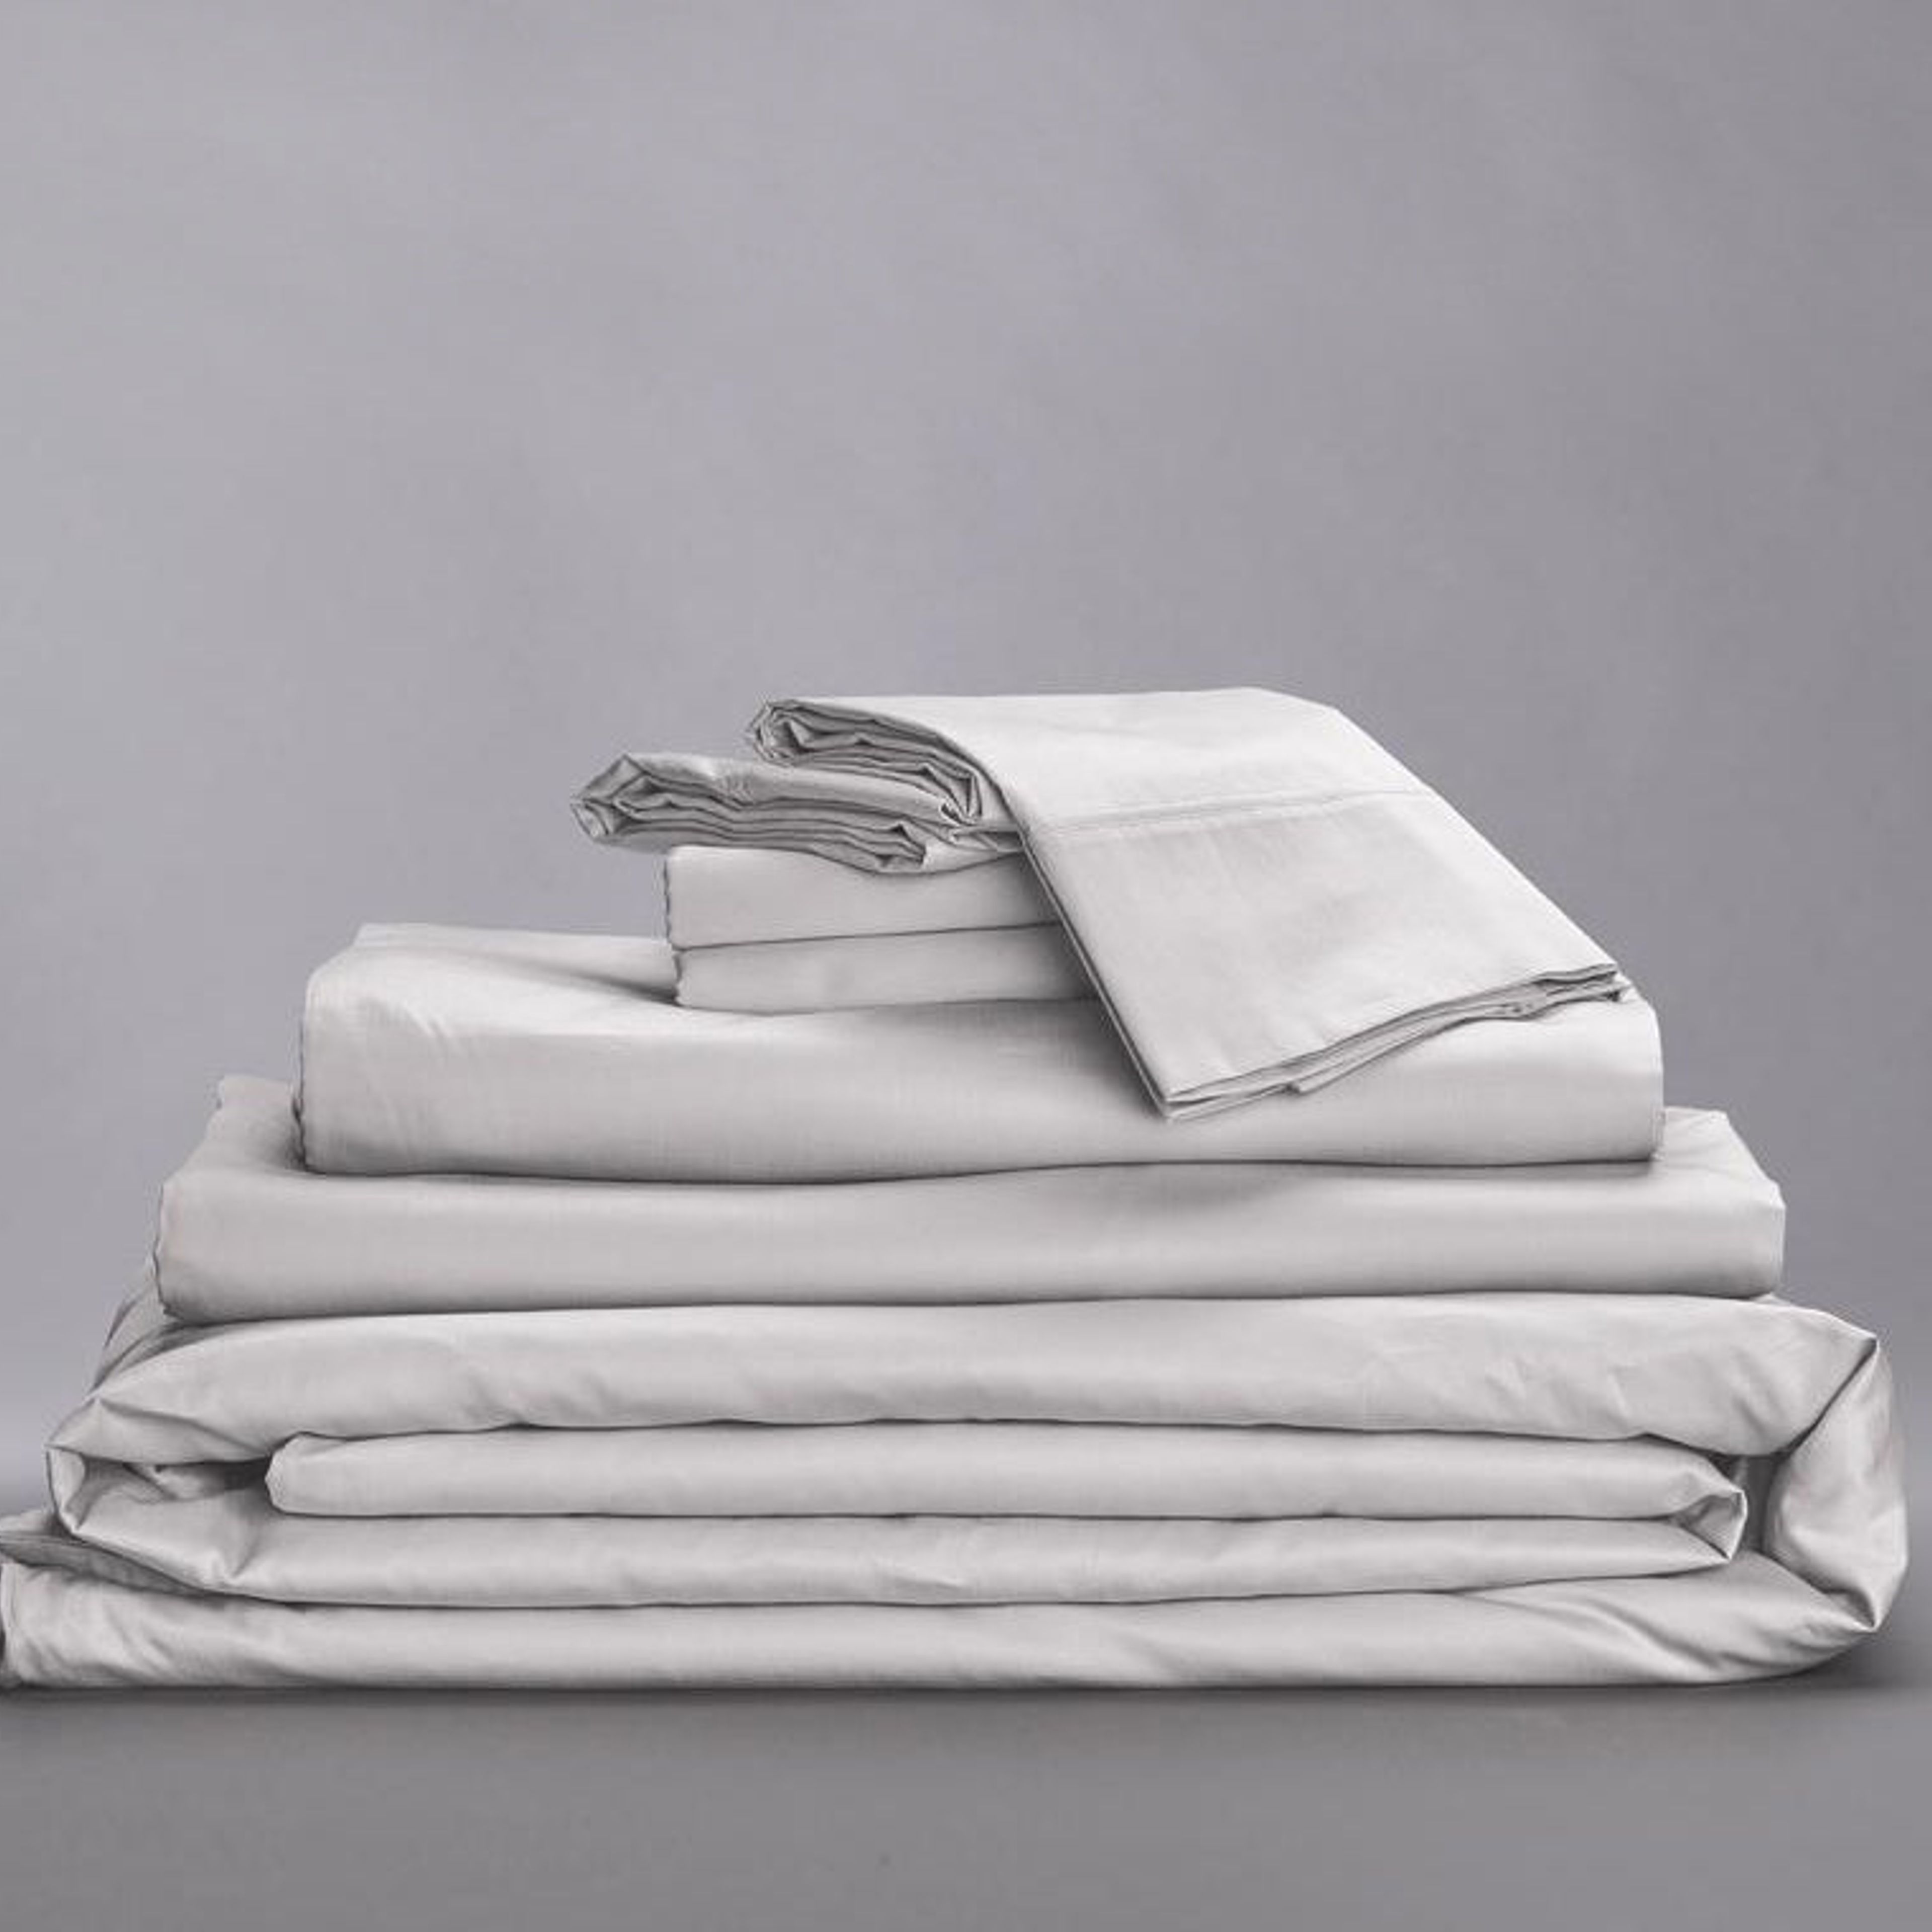 Miracle Brand Limited Time Deal - Miracle Sheet Set + 3pc Towel Set on  Marmalade